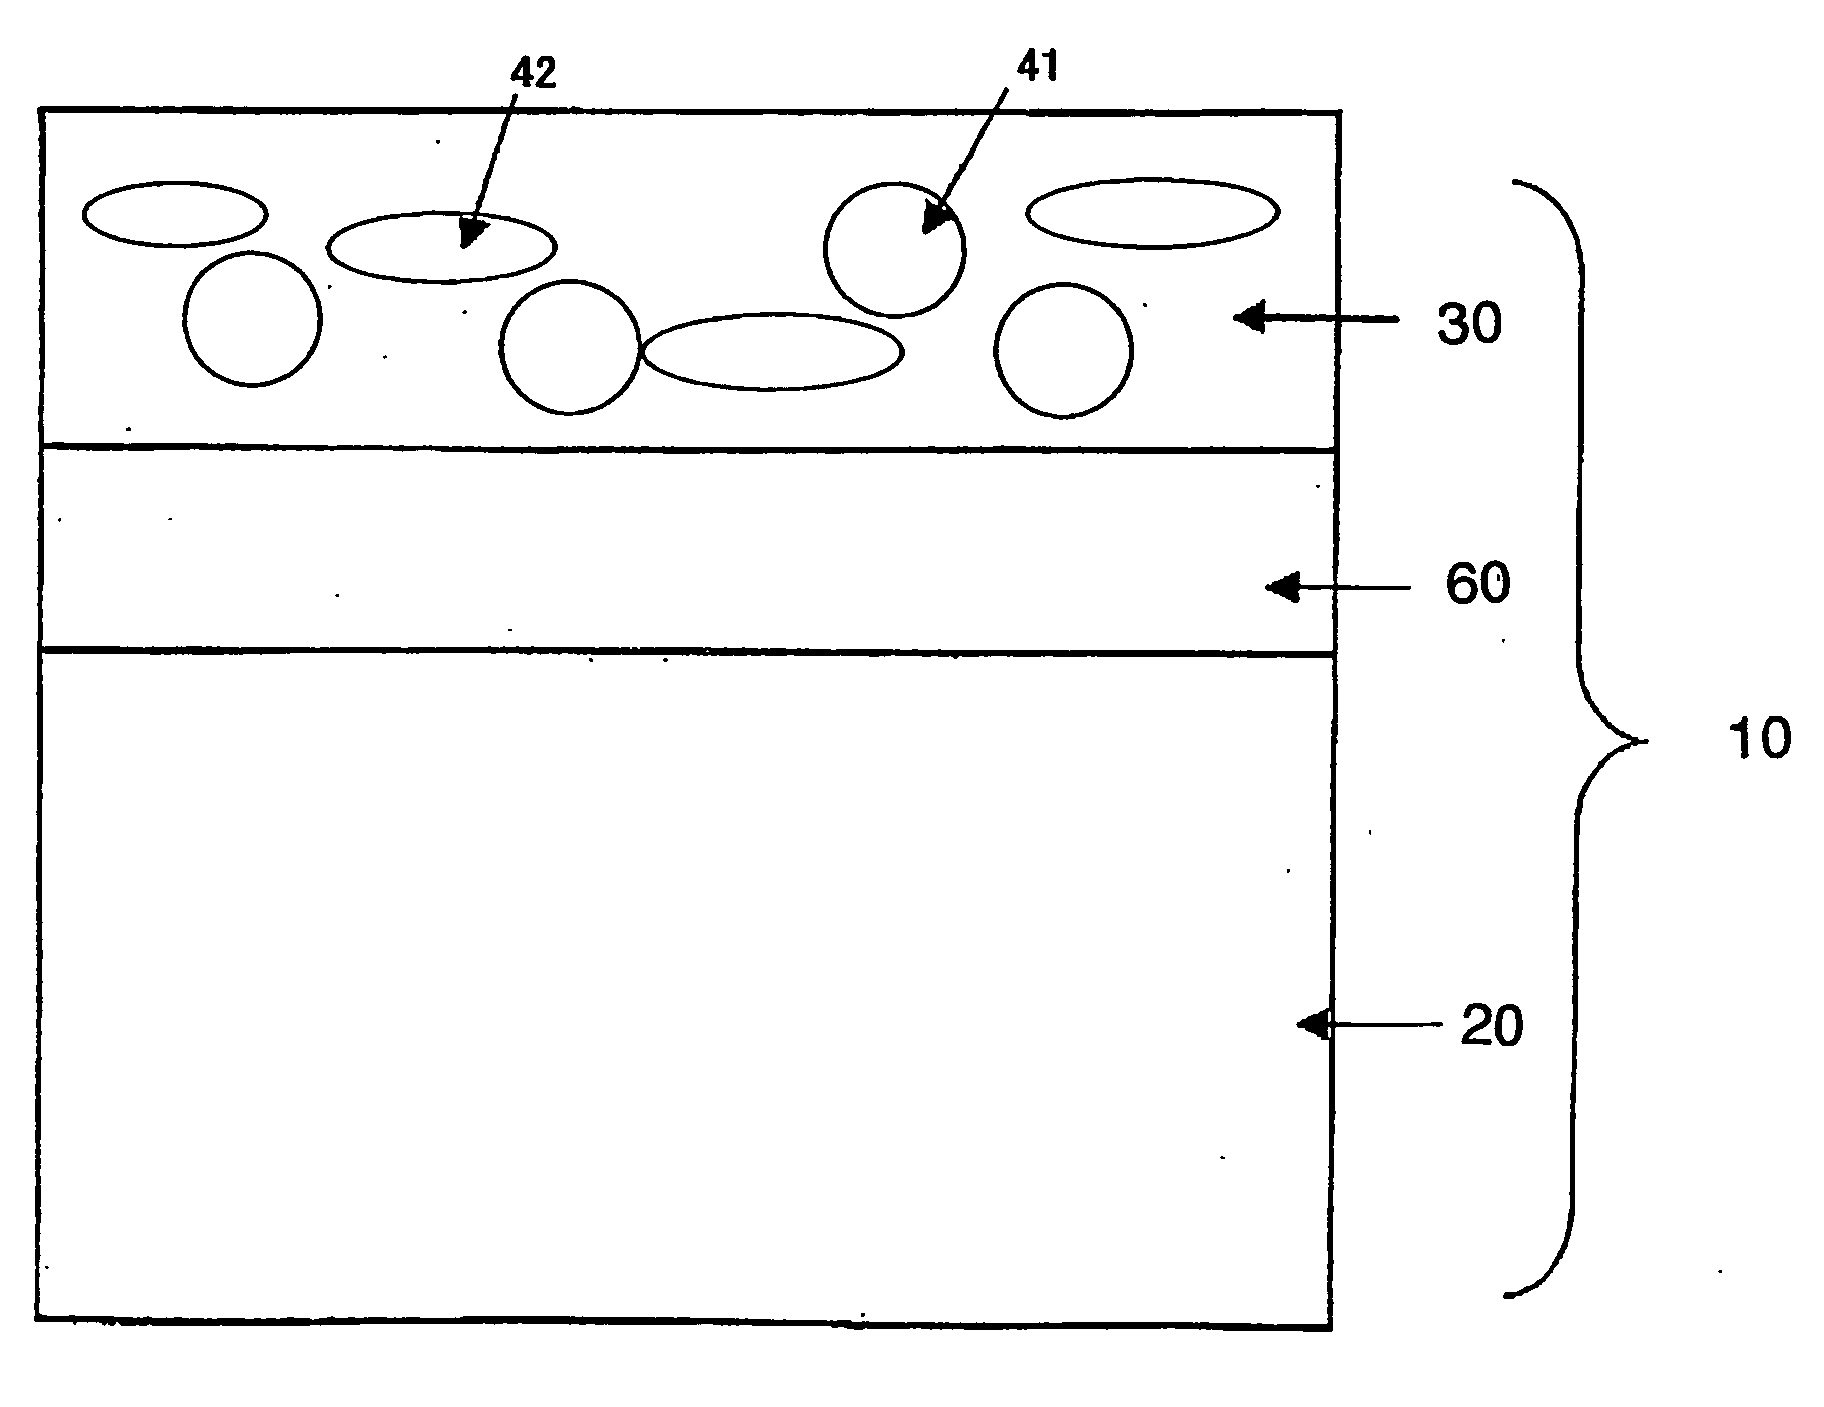 Diffusion film comprising transparent substrate and diffusion layer